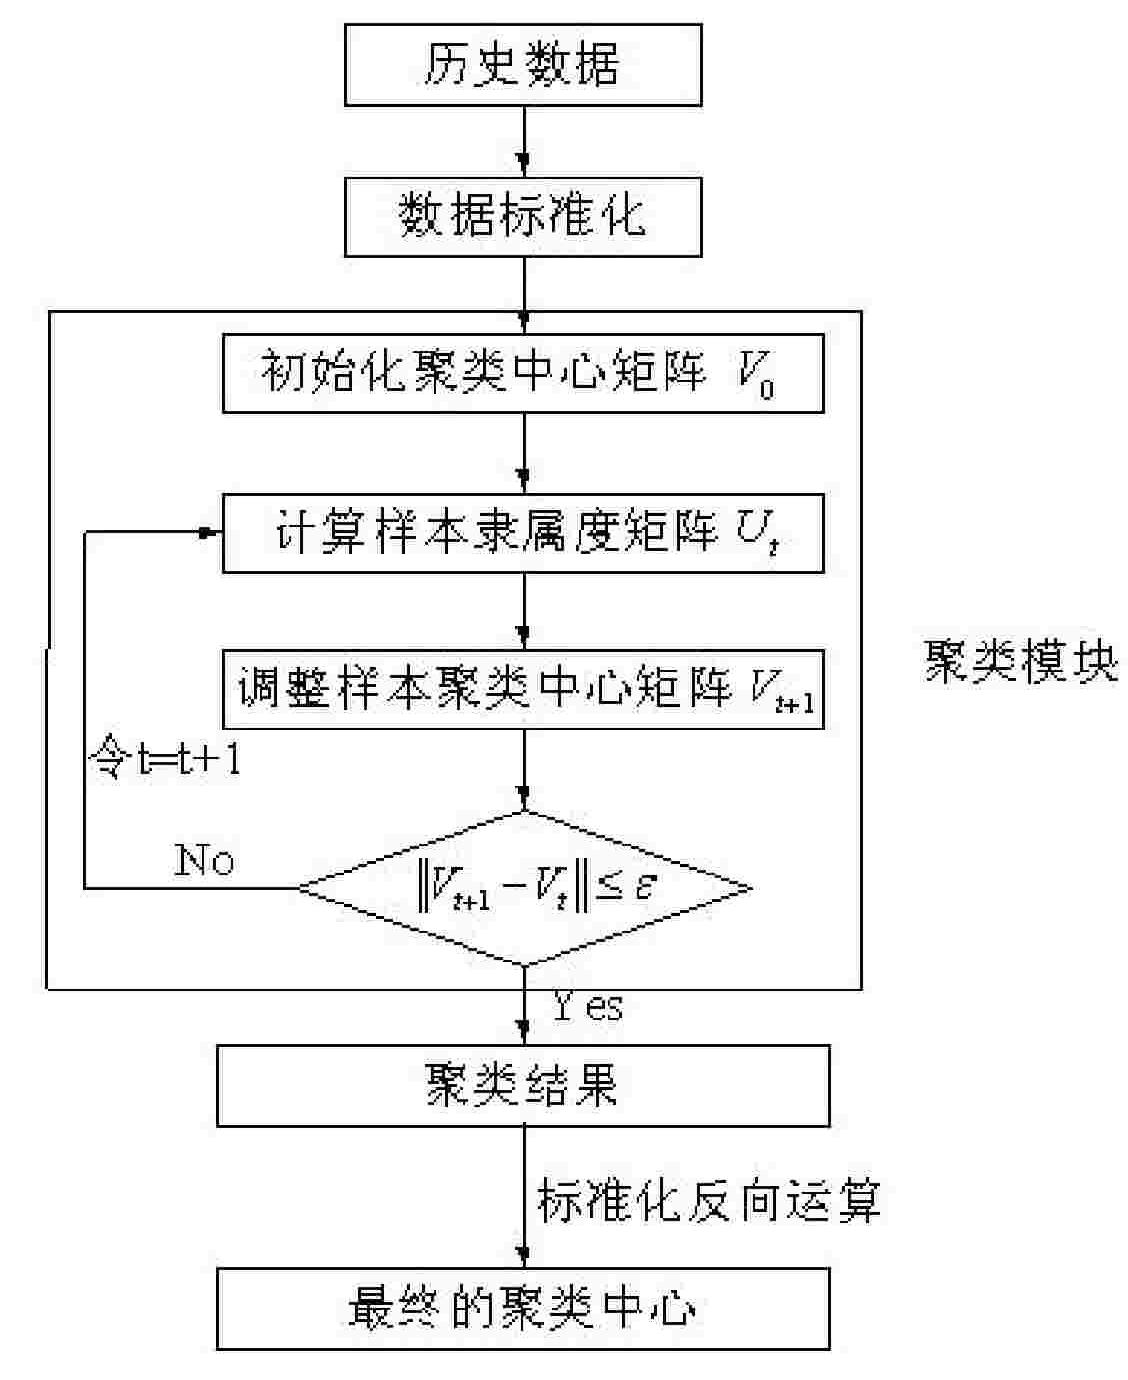 Method for judging road traffic state based on annular coil of signal lamp system